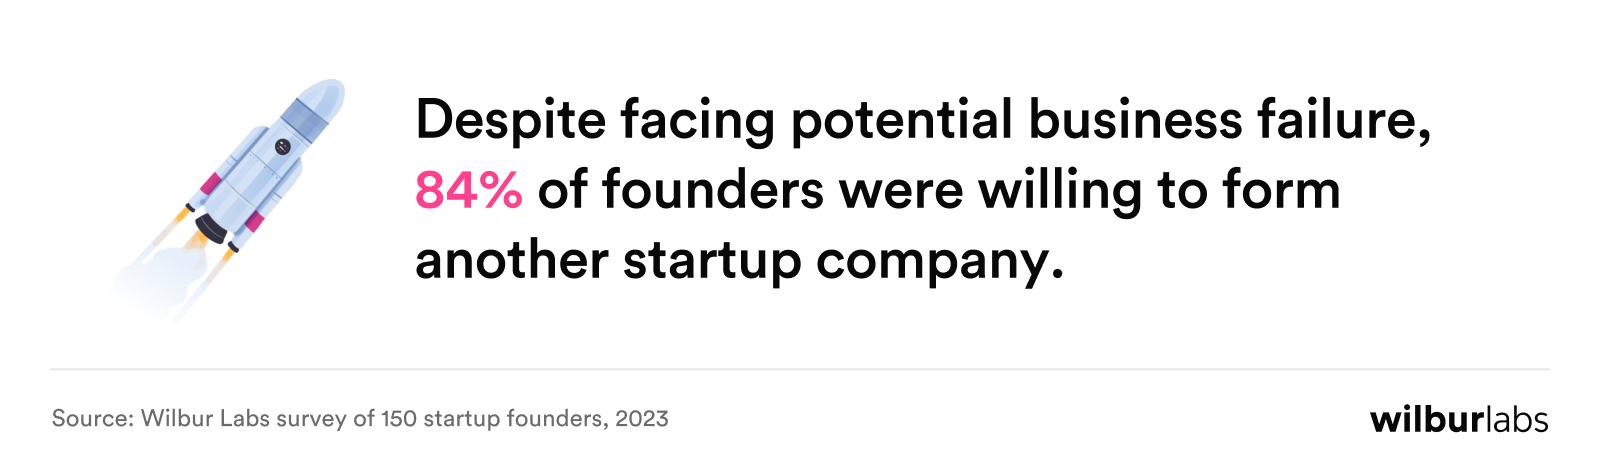 statistic of founders facing business failure